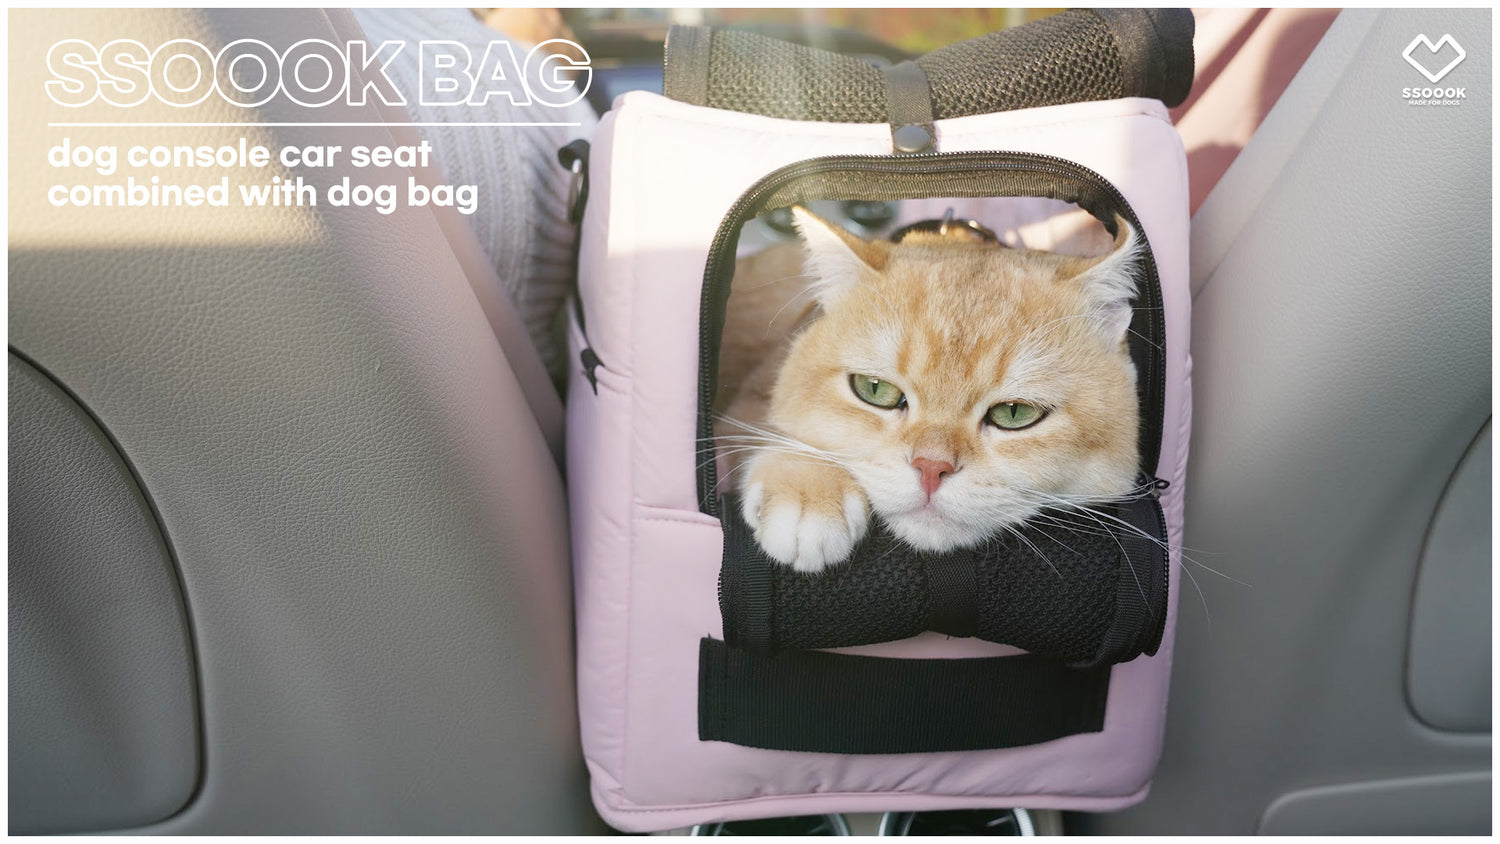 SSOOOK BAG dog console car seat combined with dog bag